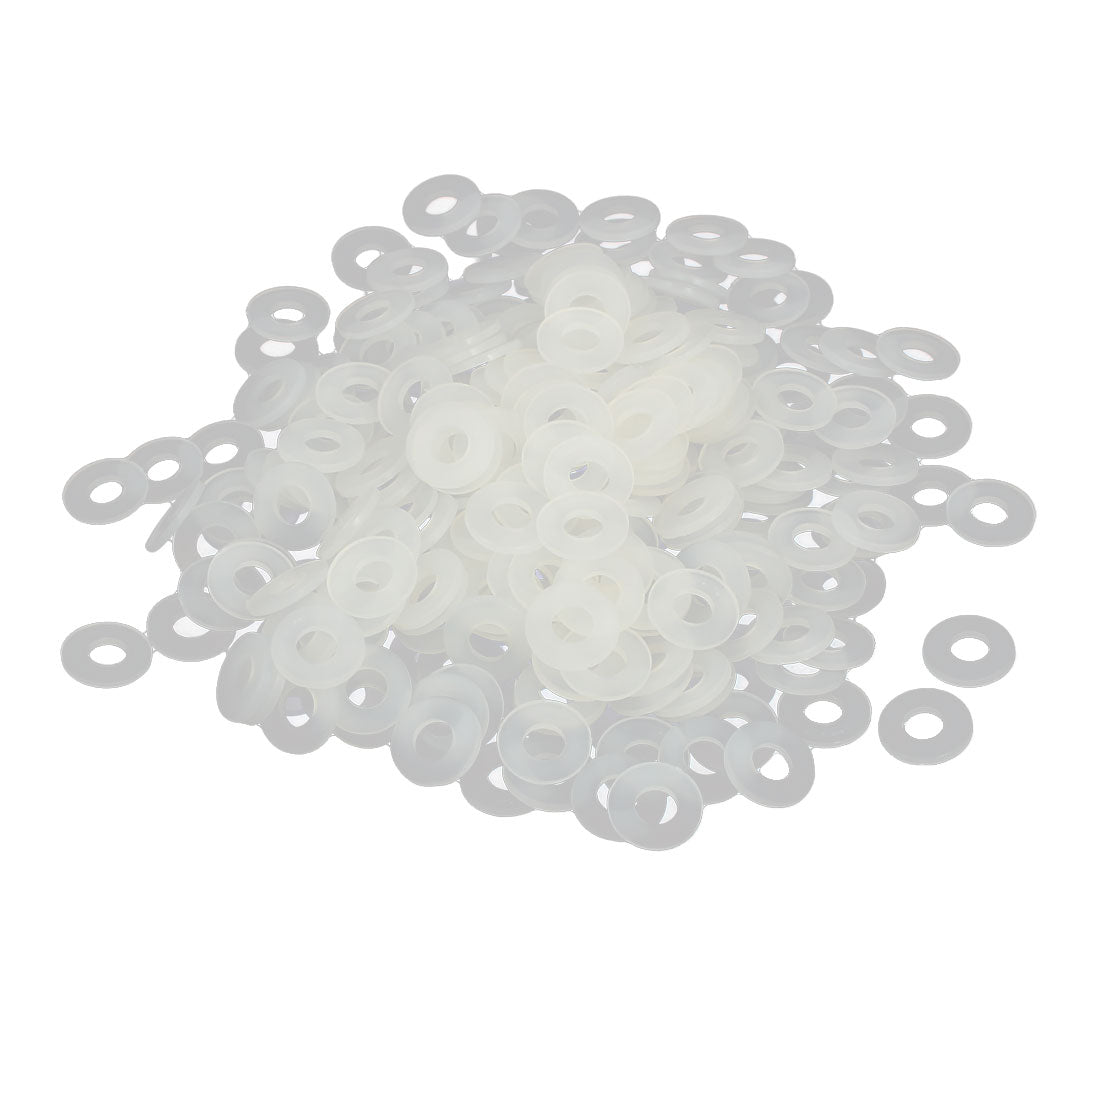 Uxcell Uxcell M5 x 10mm x 1mm Nylon Flat Insulating Washers Gaskets Spacers Grey White 300PCS